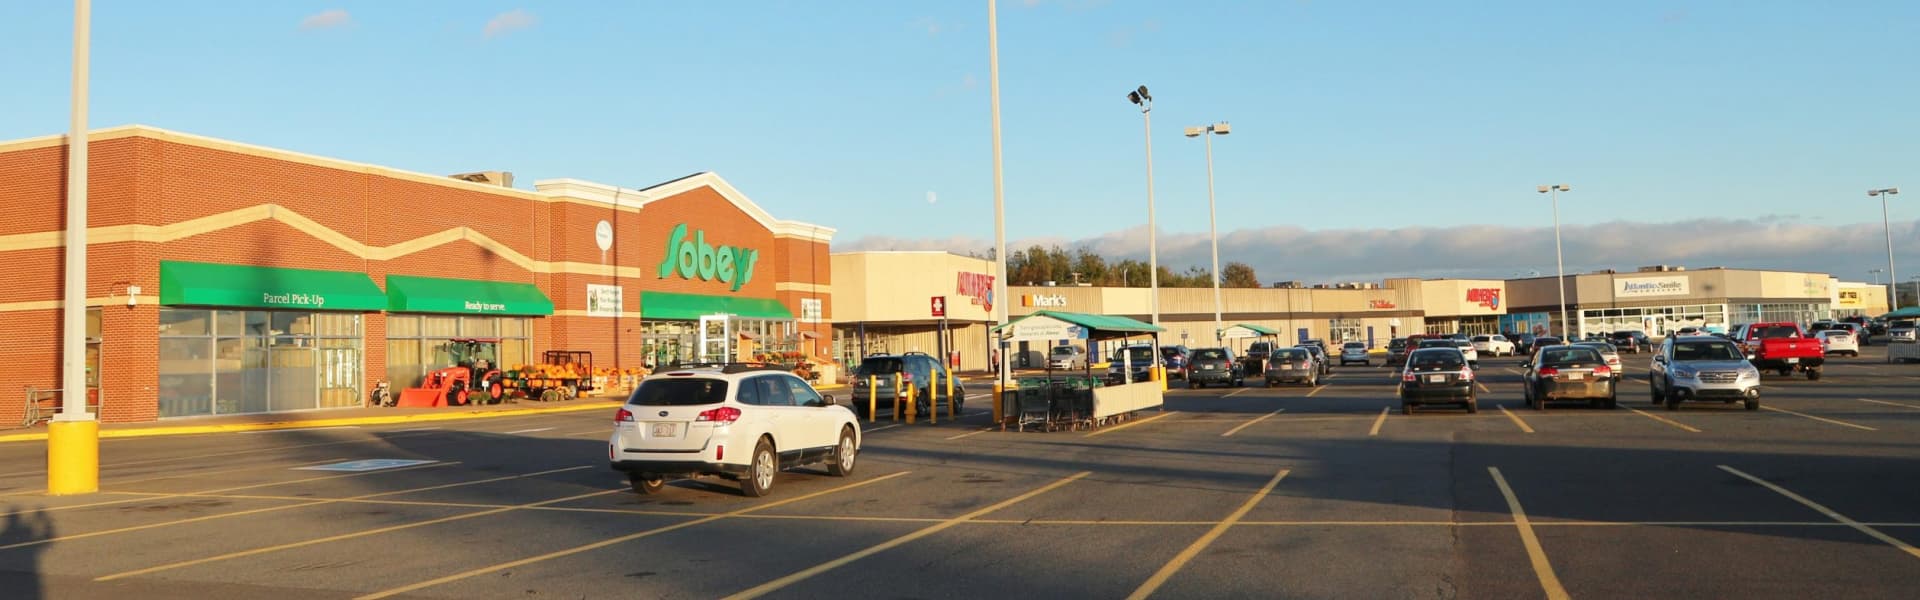 Image of Sobeys supermarket front view.